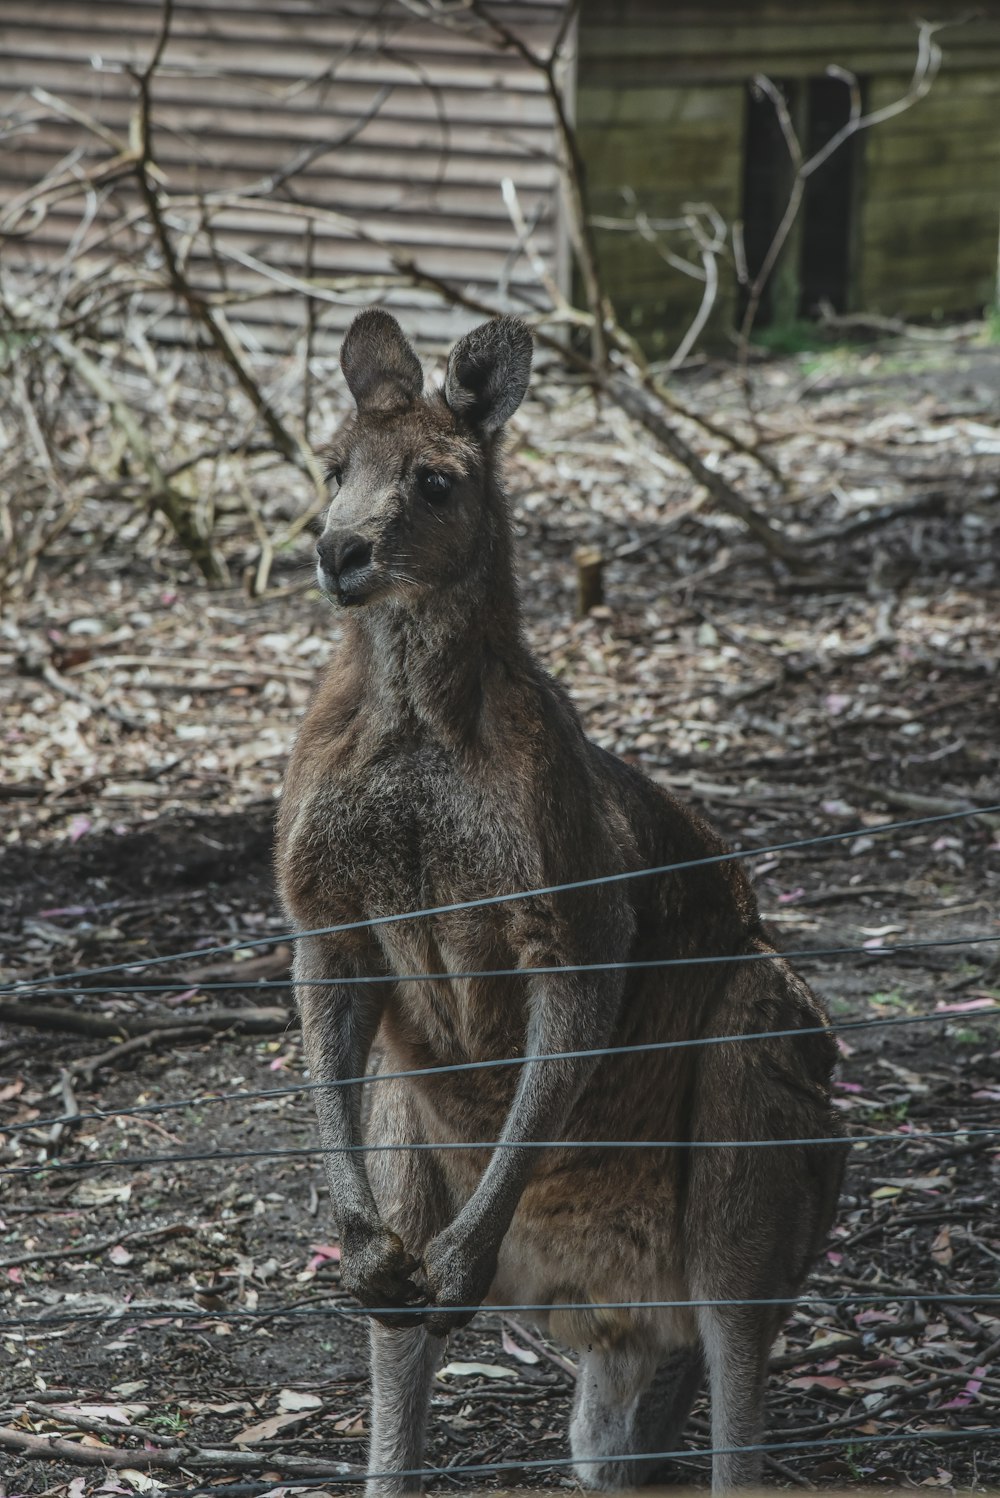 a kangaroo is standing behind a wire fence